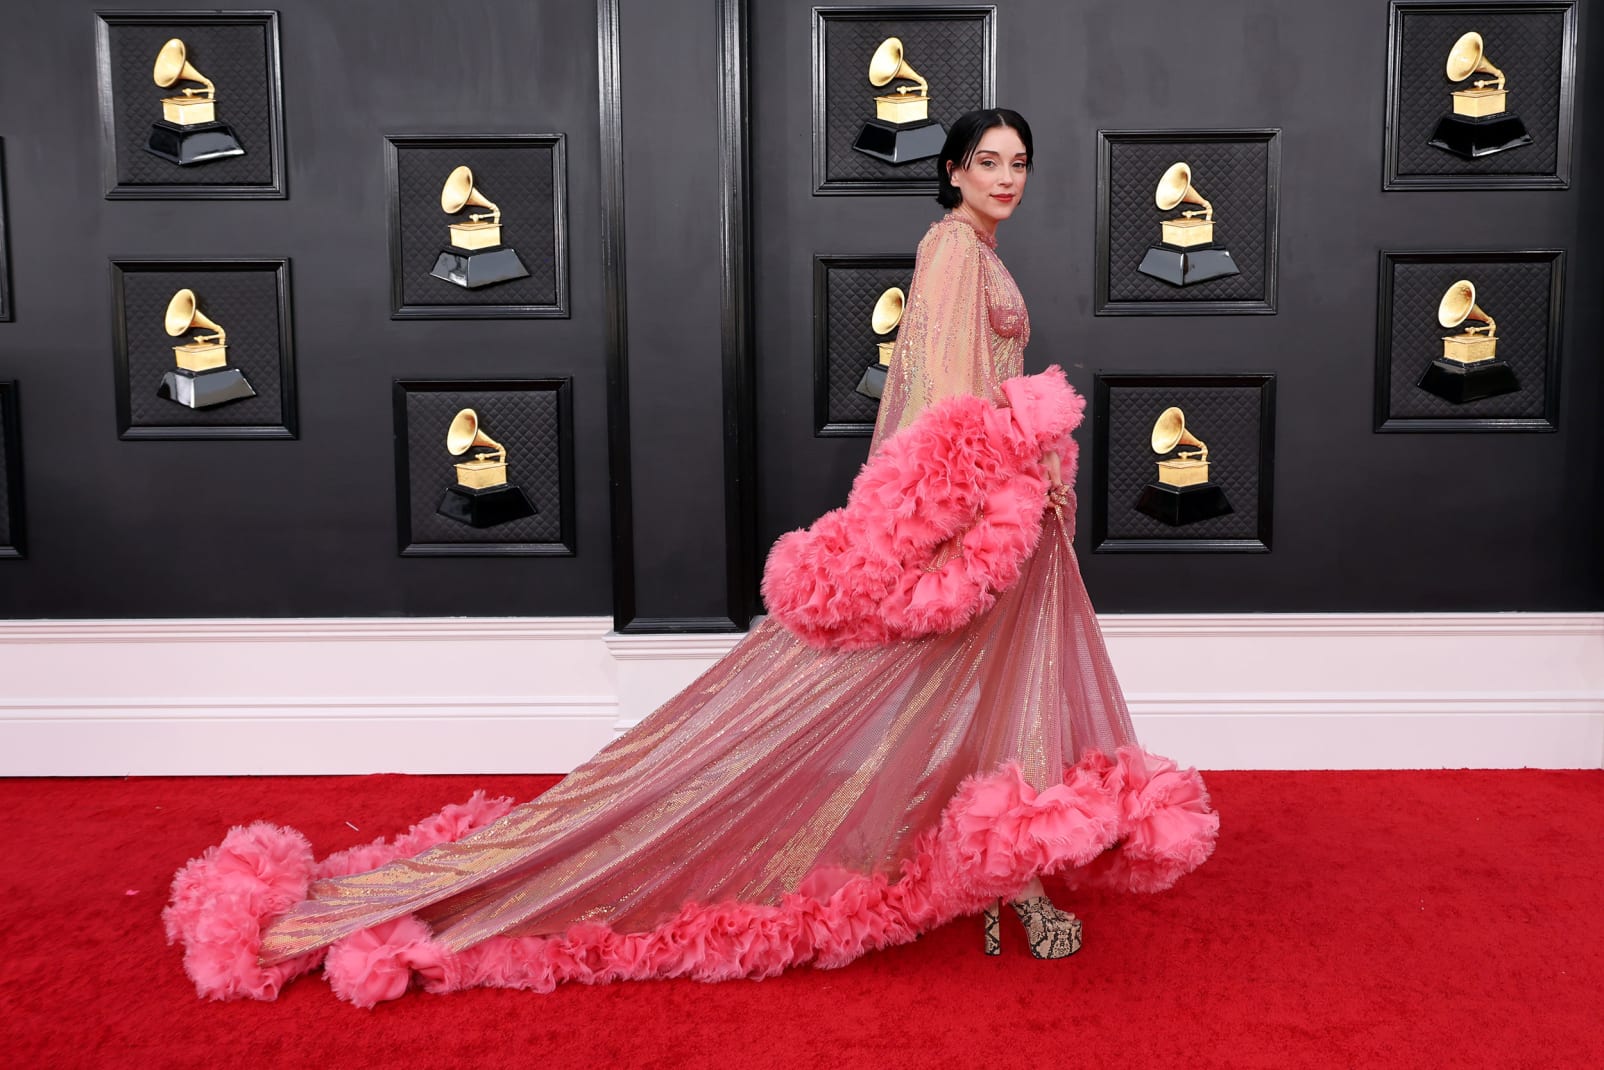 St. Vincent wore a shimmery Gucci gown with ruffled sleeves and trim.